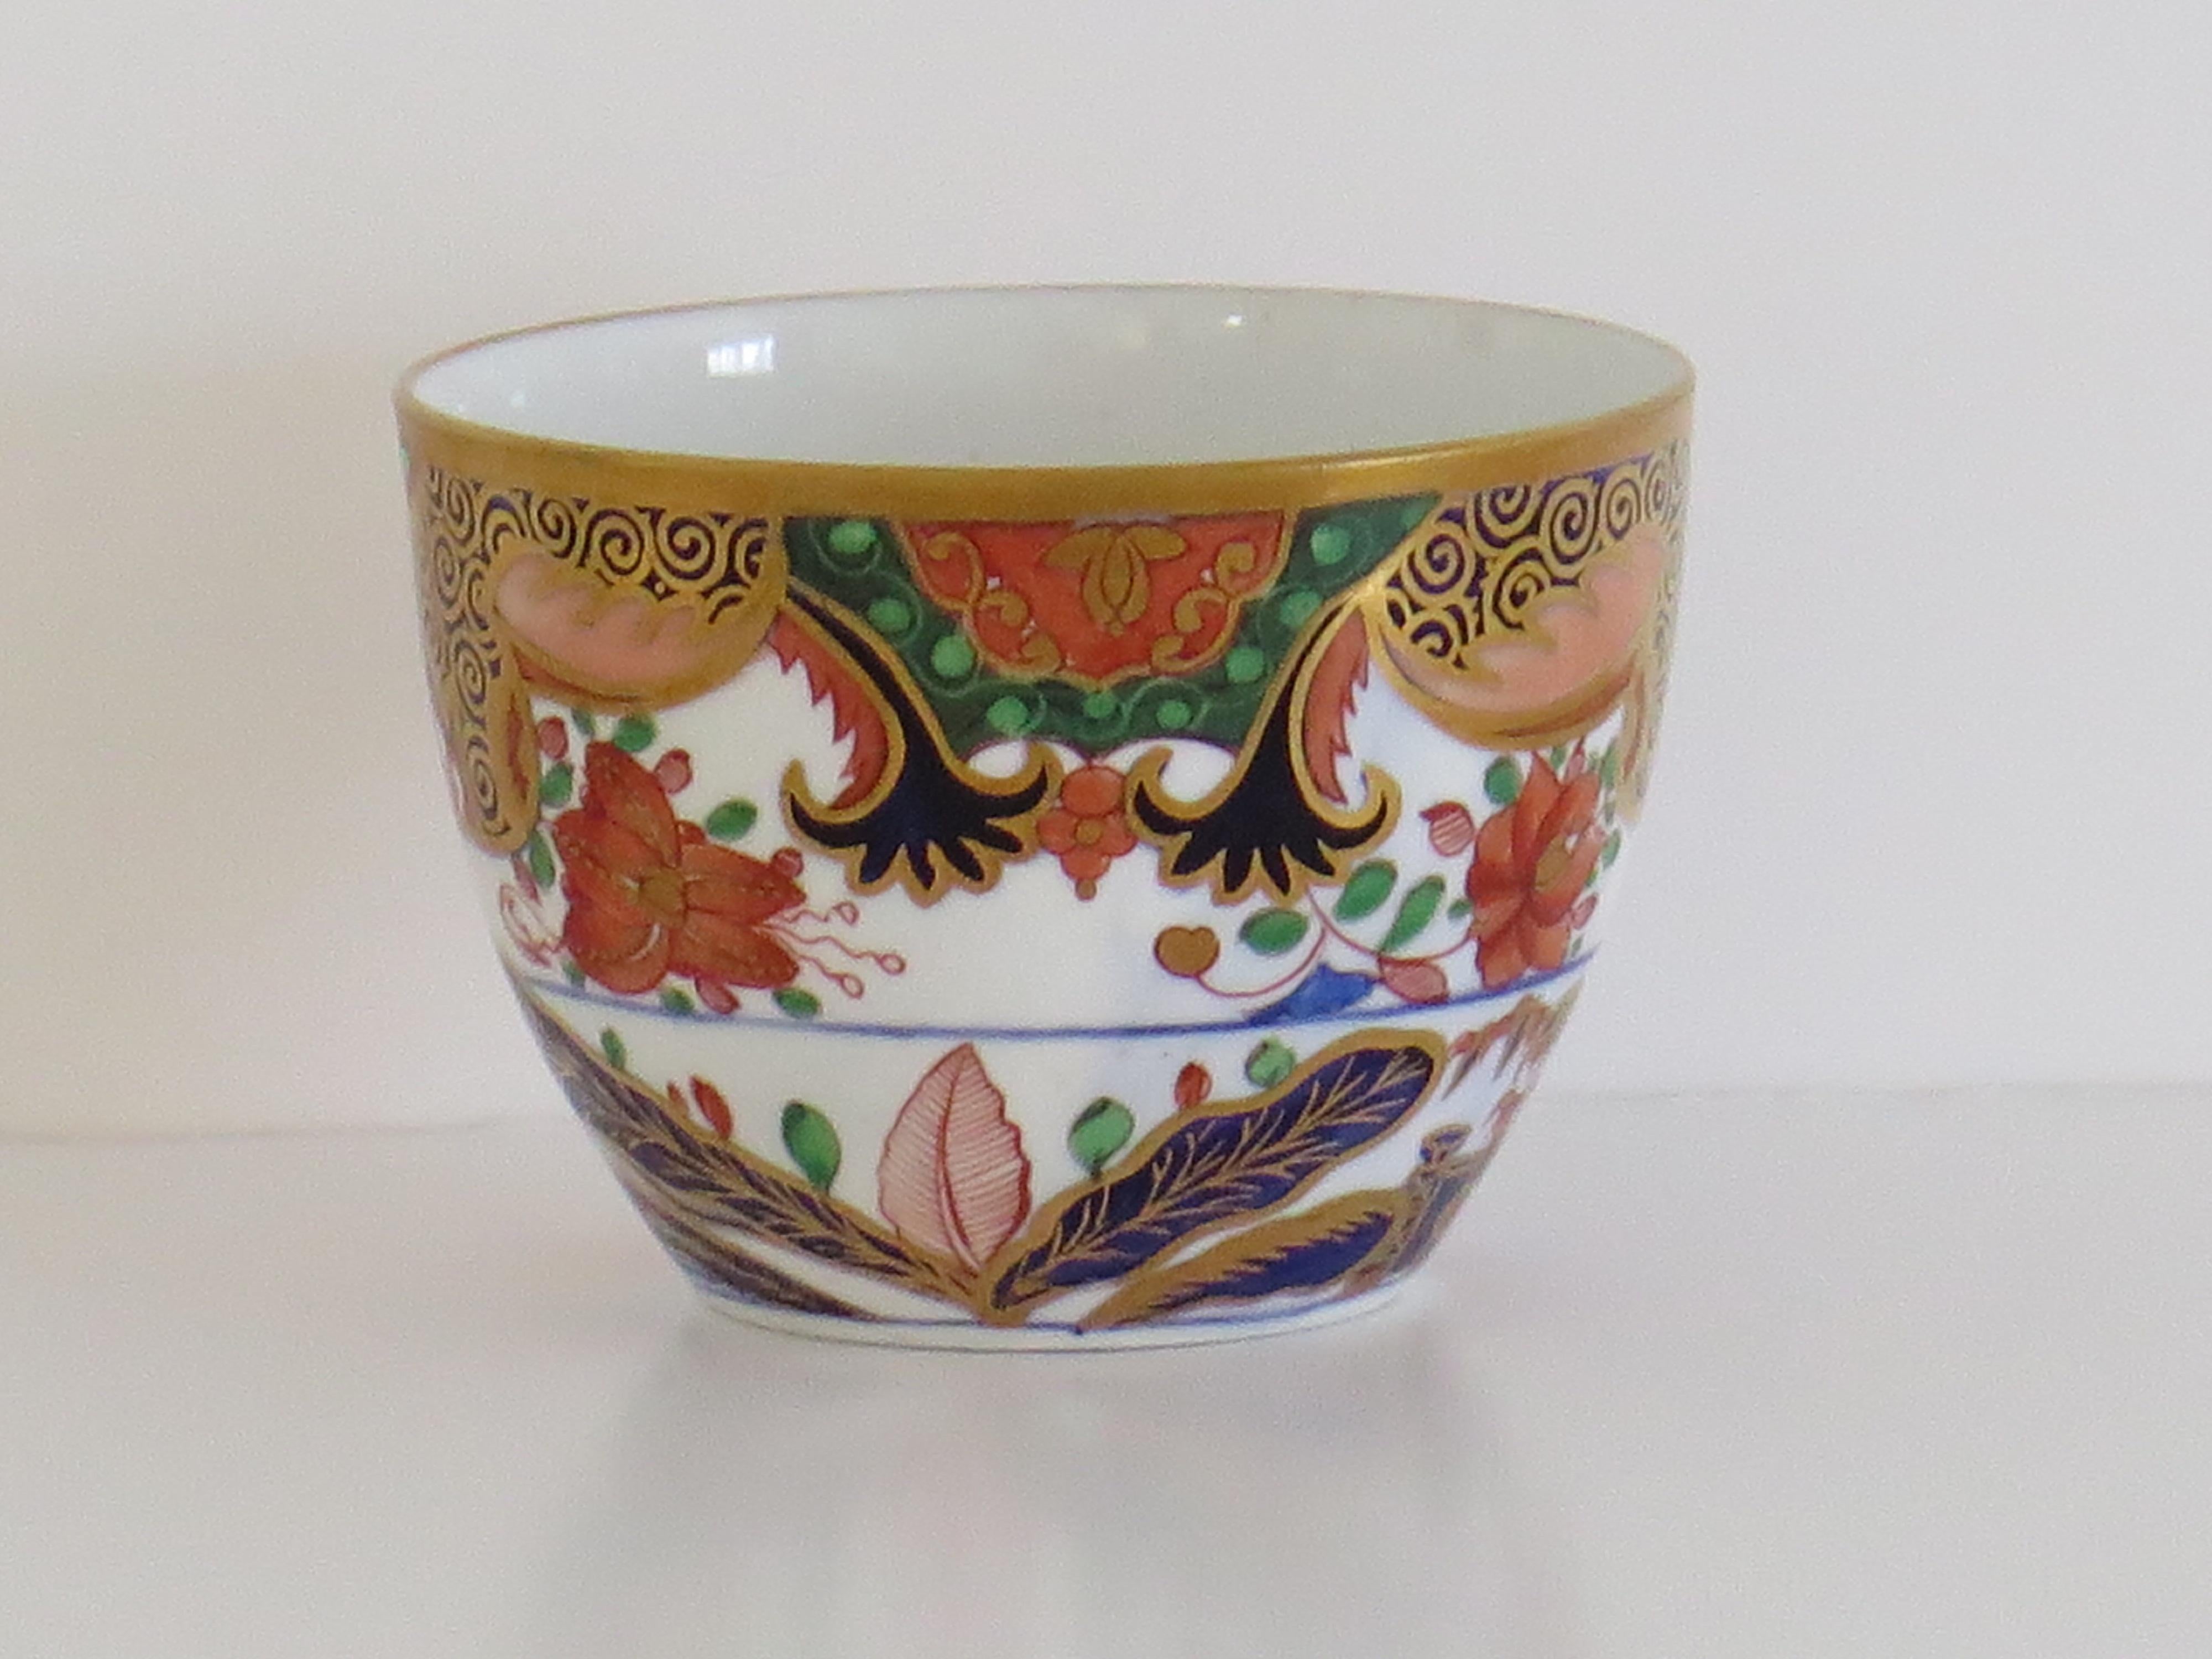 Hand-Painted Spode Porcelain Tea Cup in Hand Painted & Gilded Pattern 967, circa 1810 For Sale